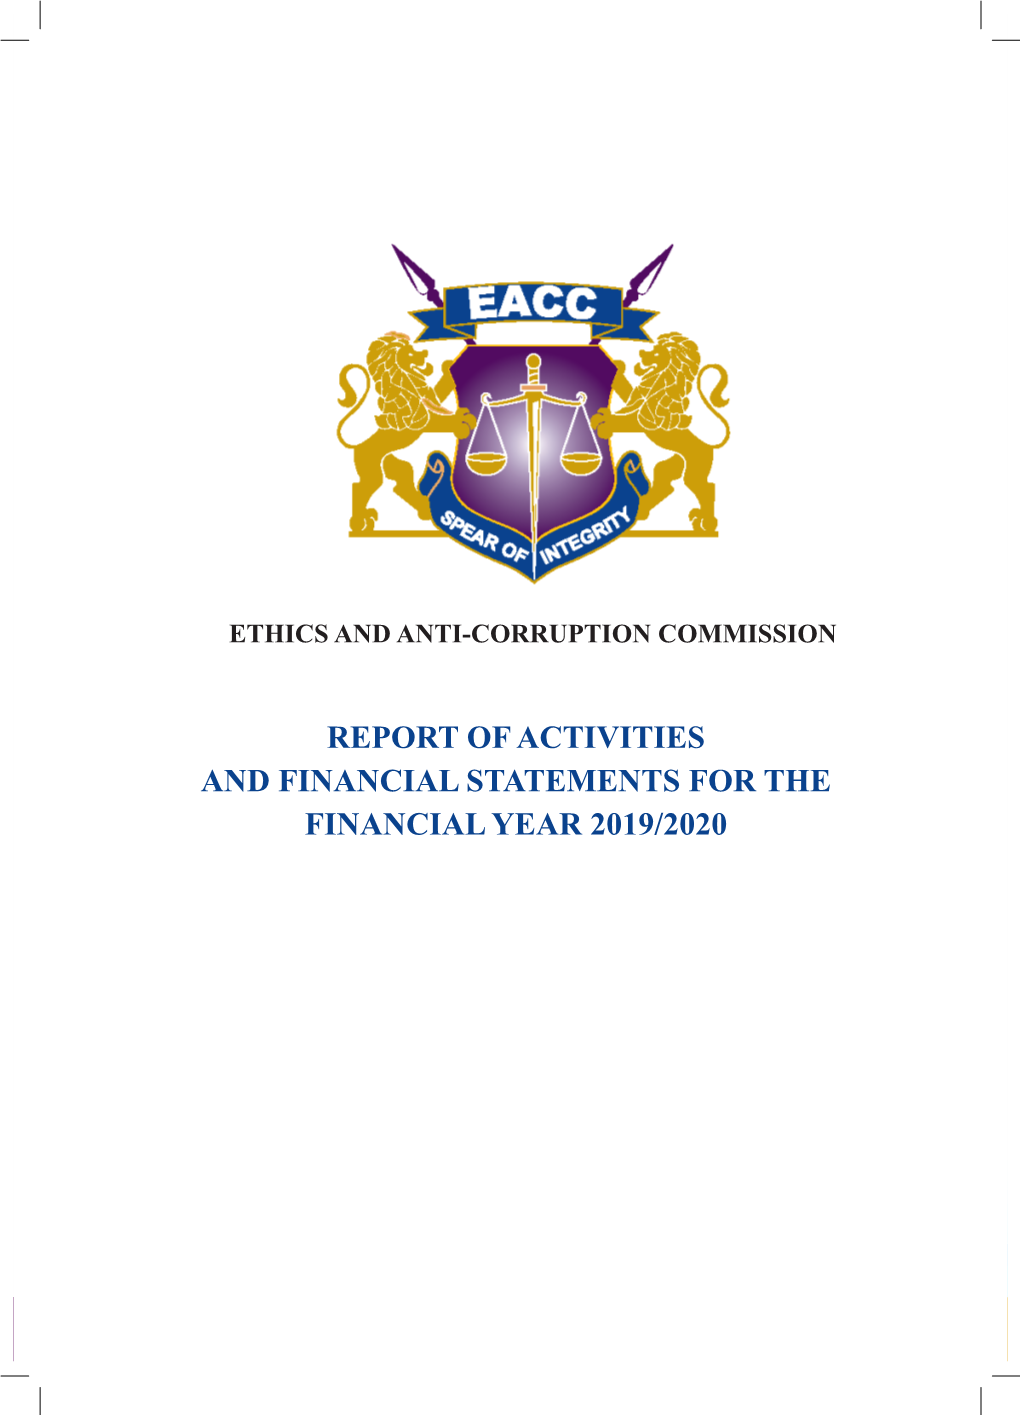 Annual Report 2019-20 Size: 14410 Kb